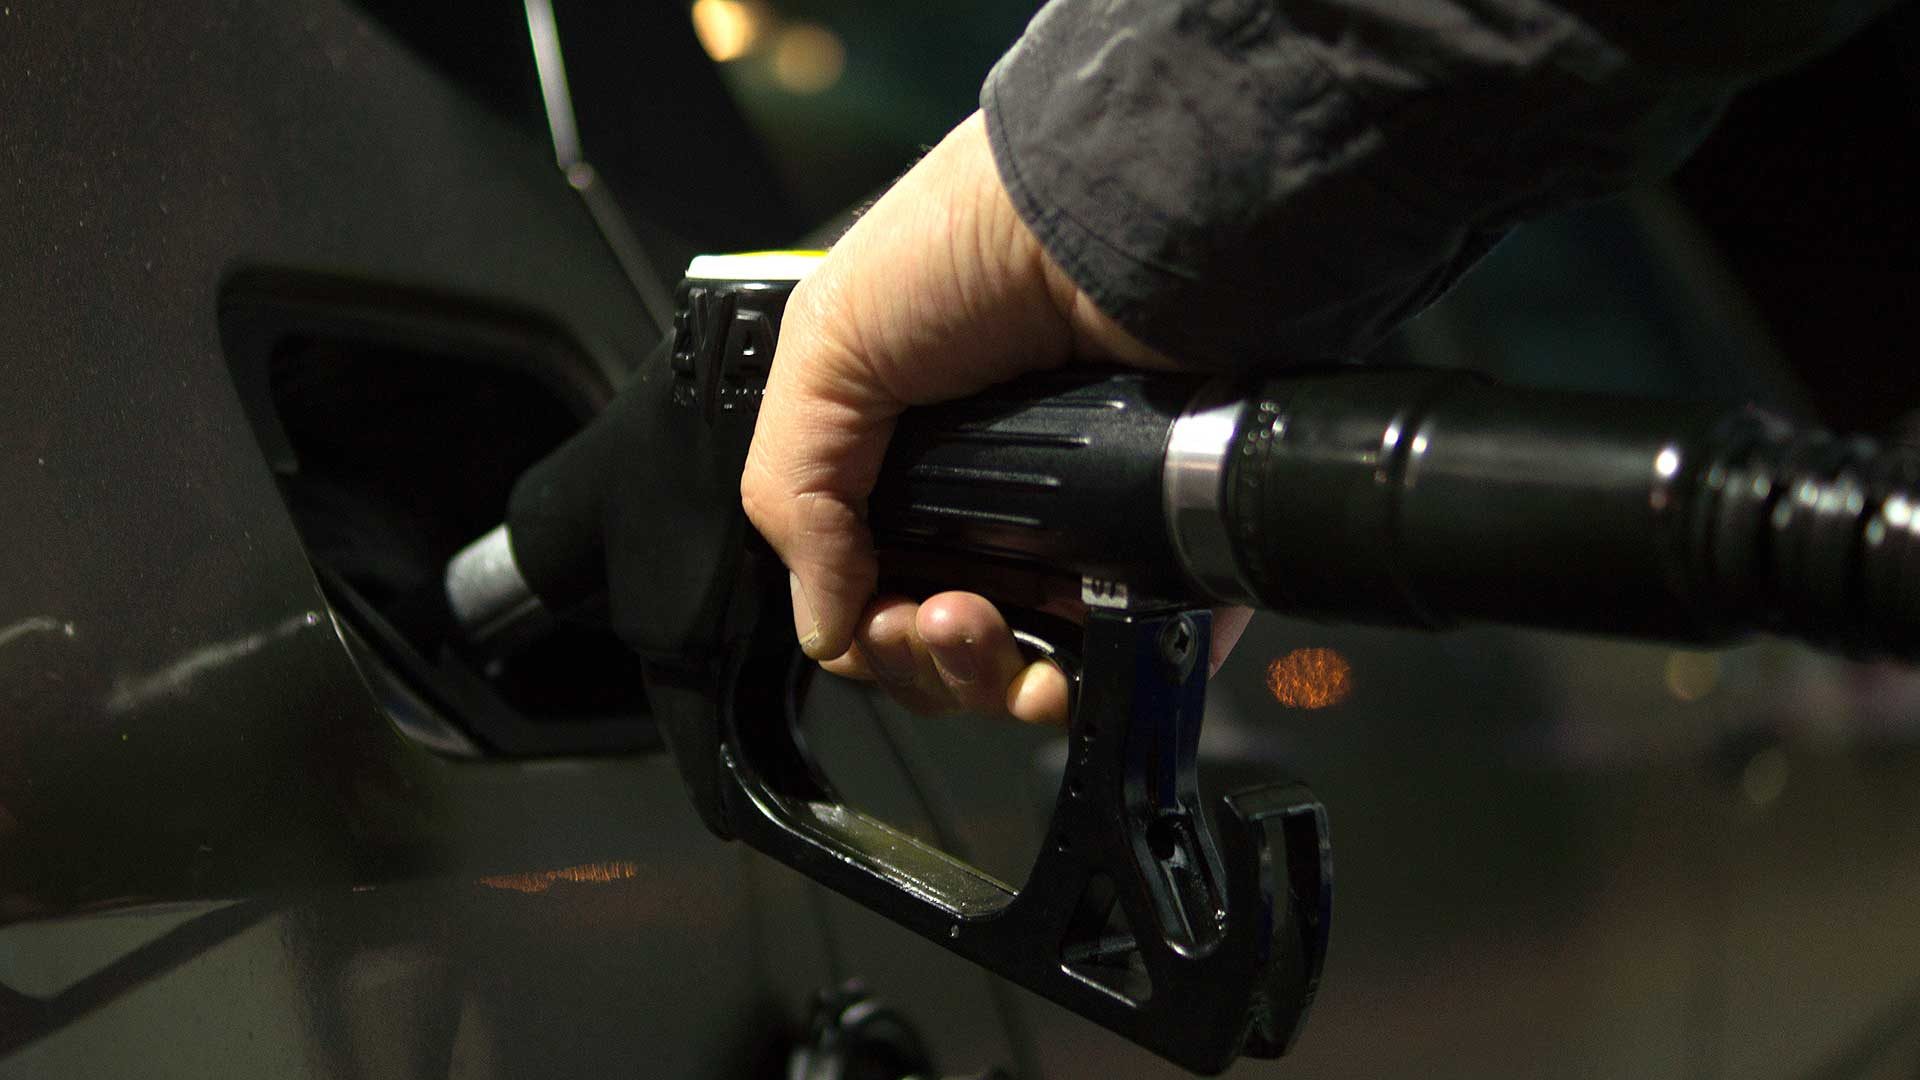 Filling a car with fuel at a petrol station